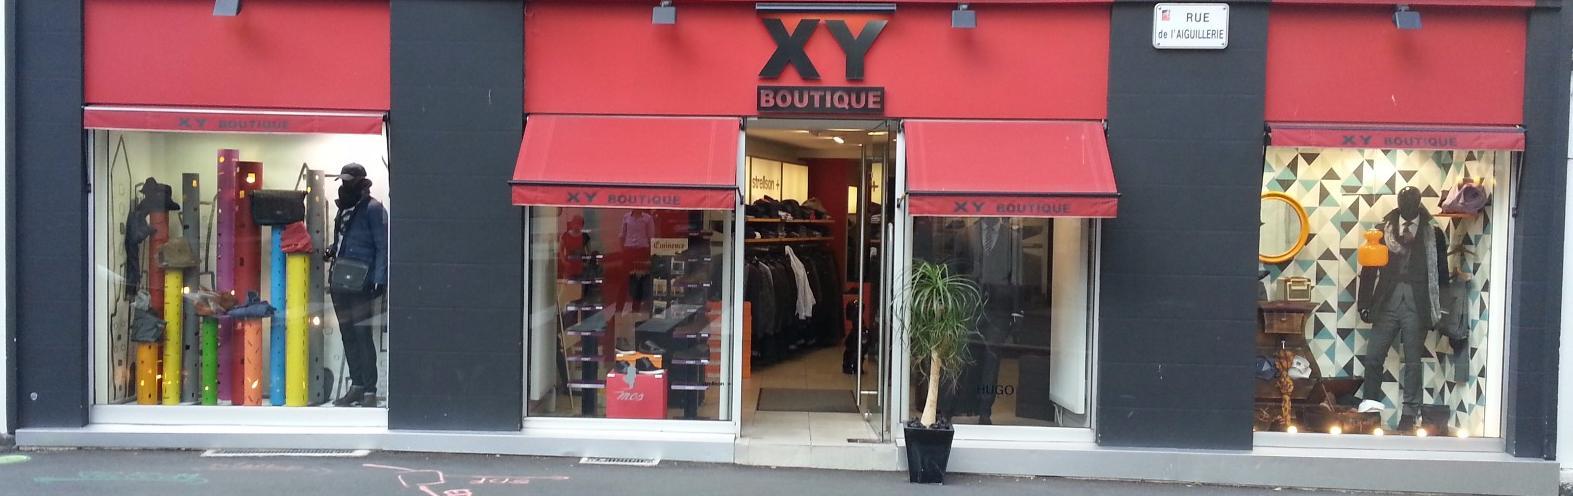 XY Boutique Angers